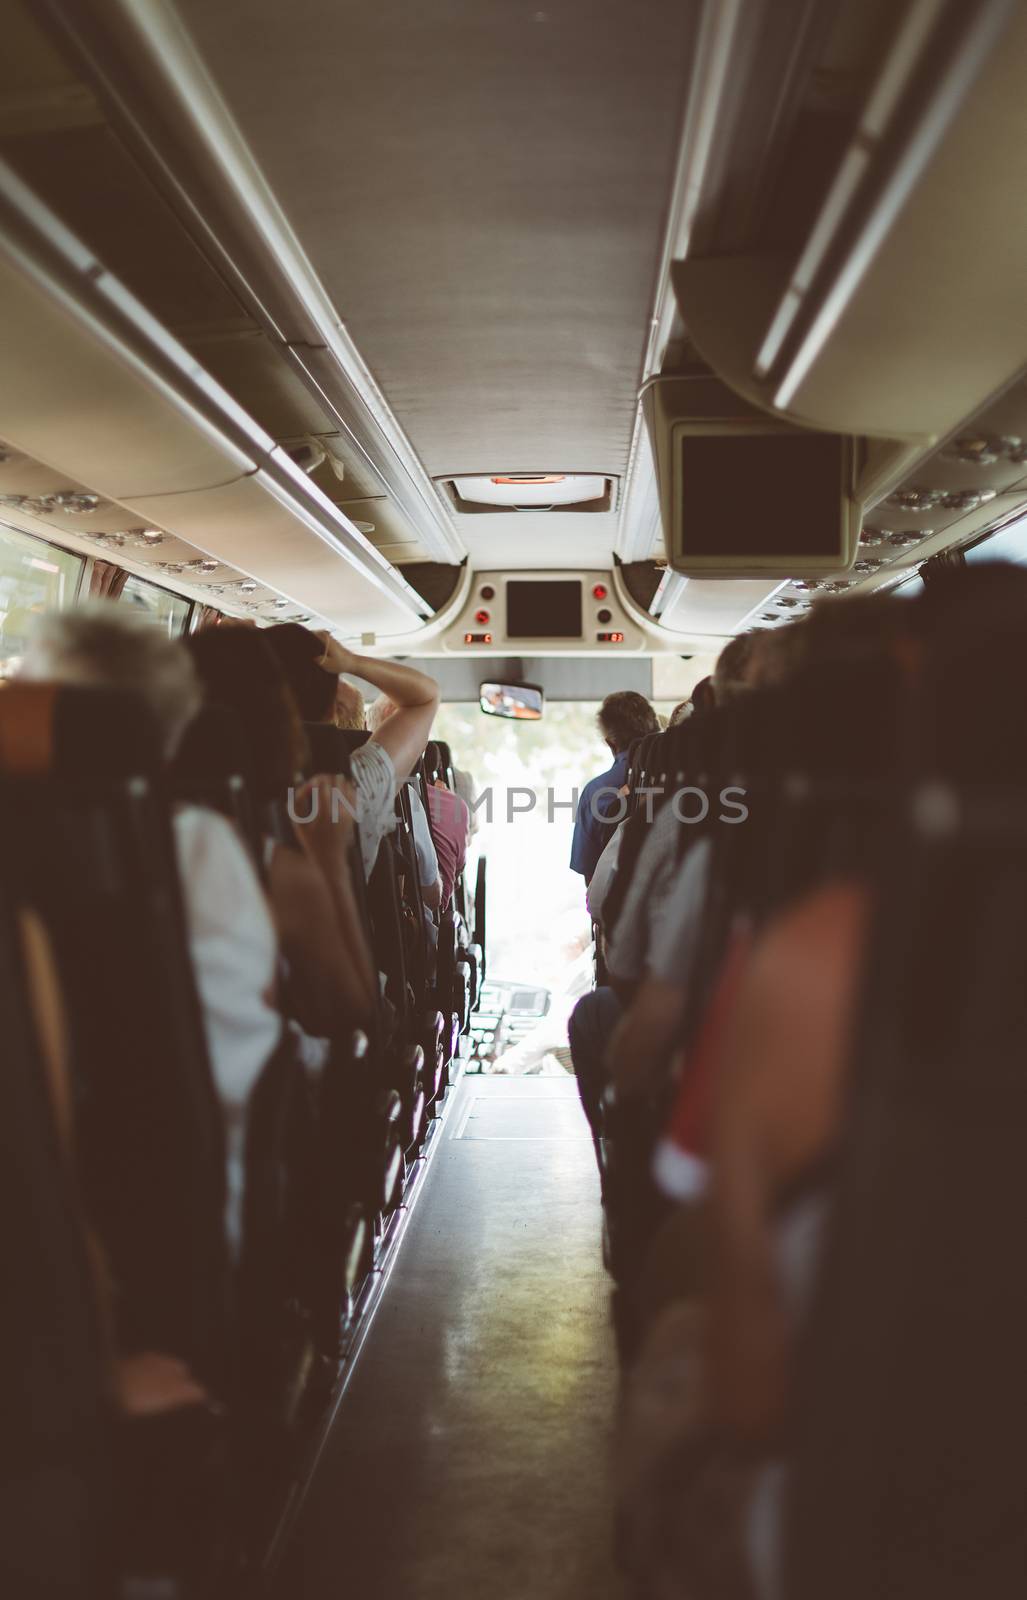 View from inside the bus with passengers. by dmitrimaruta